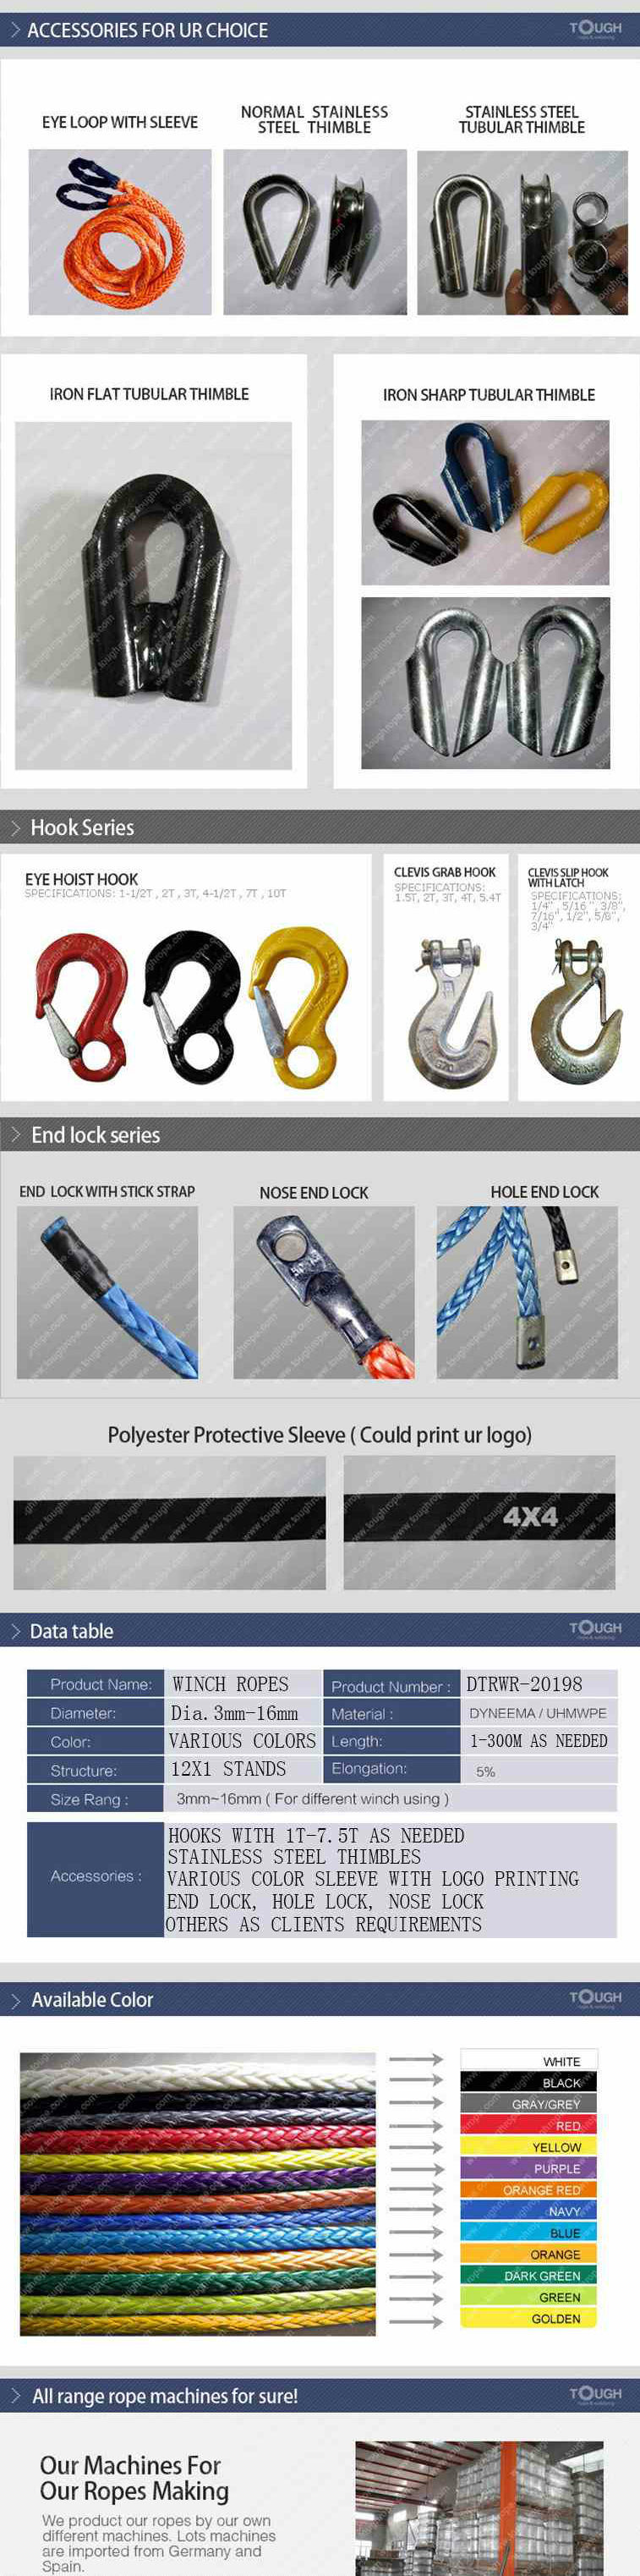 Dyneema Fiber Synthetic Rope with Hook for Electric Winch